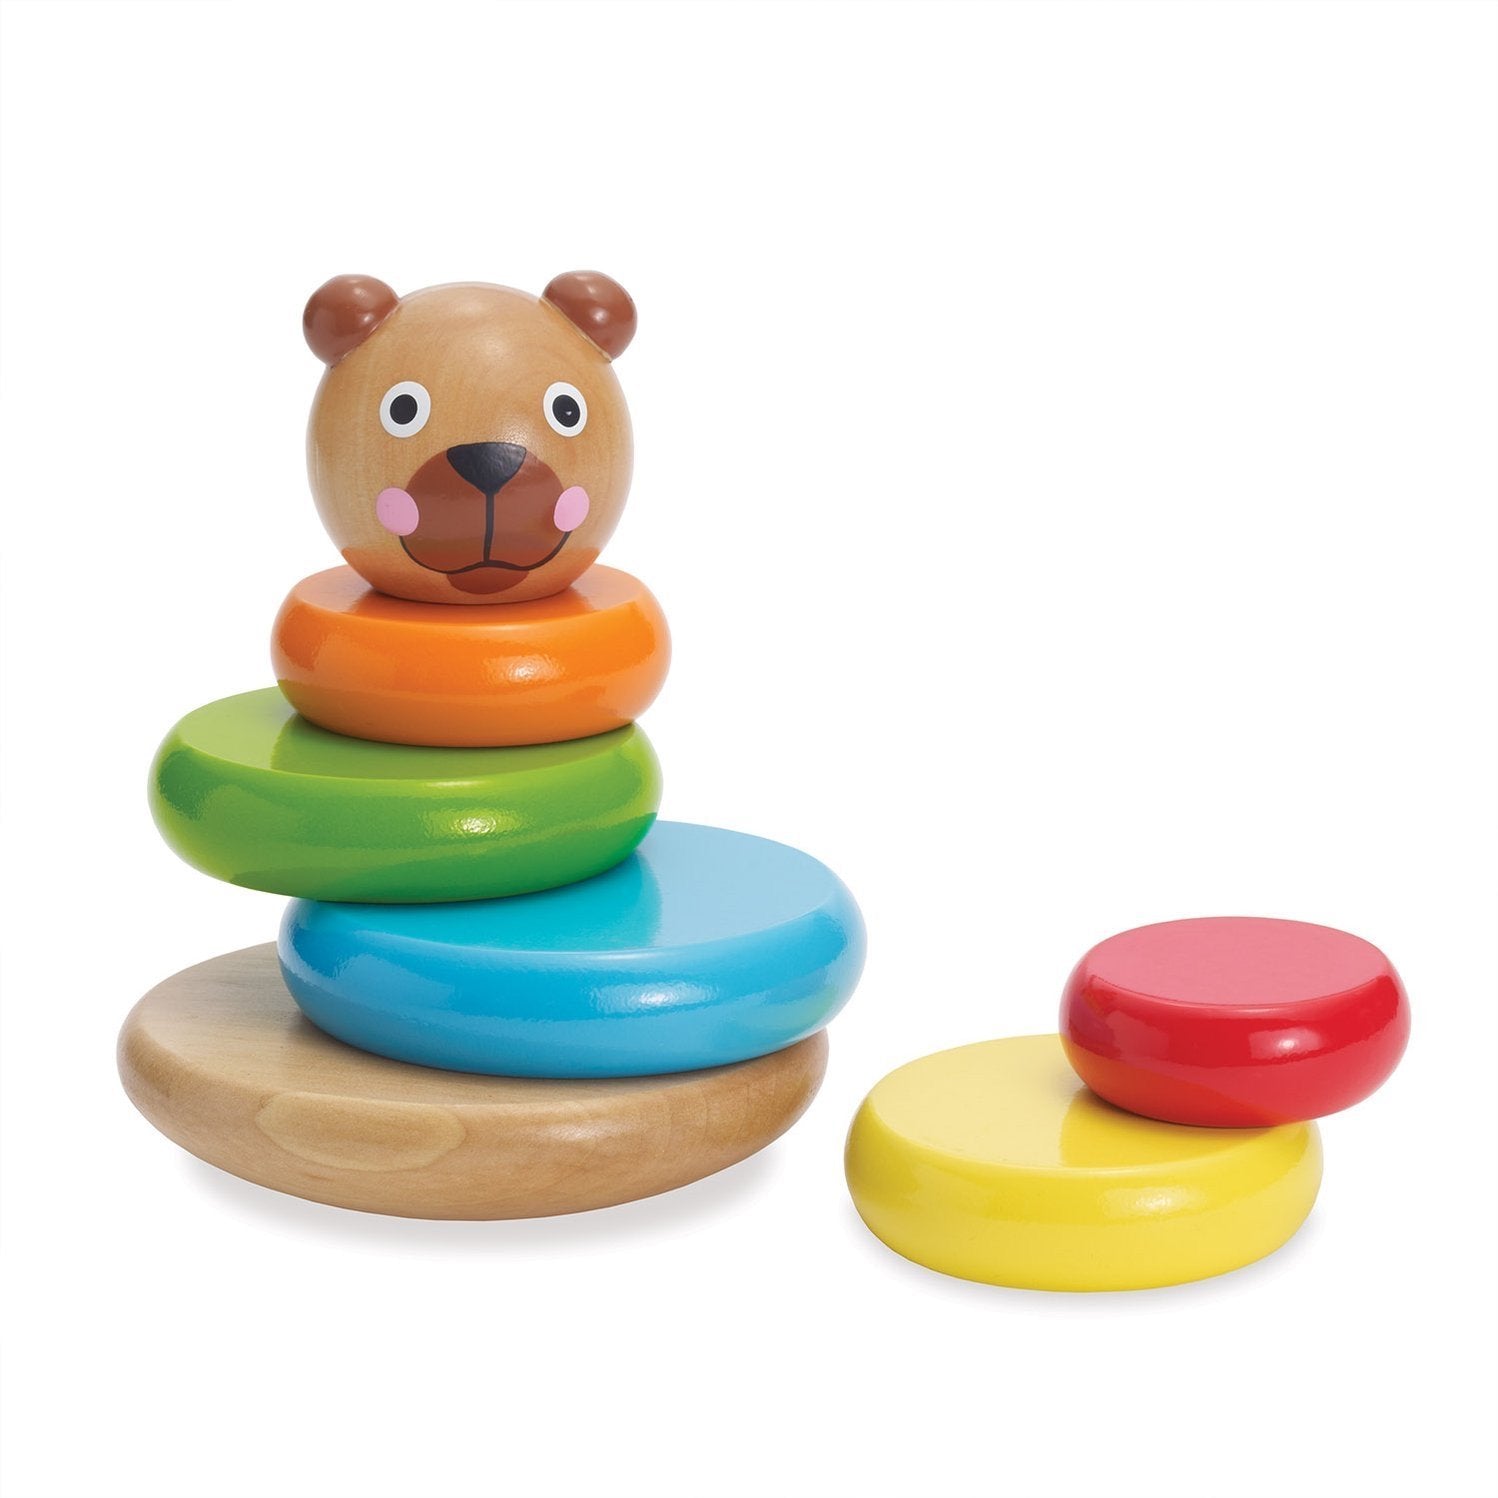 Brilliant Bear Magnetic Stack-up by Manhattan Toy - Wood Wood Toys Canada's Favourite Montessori Toy Store